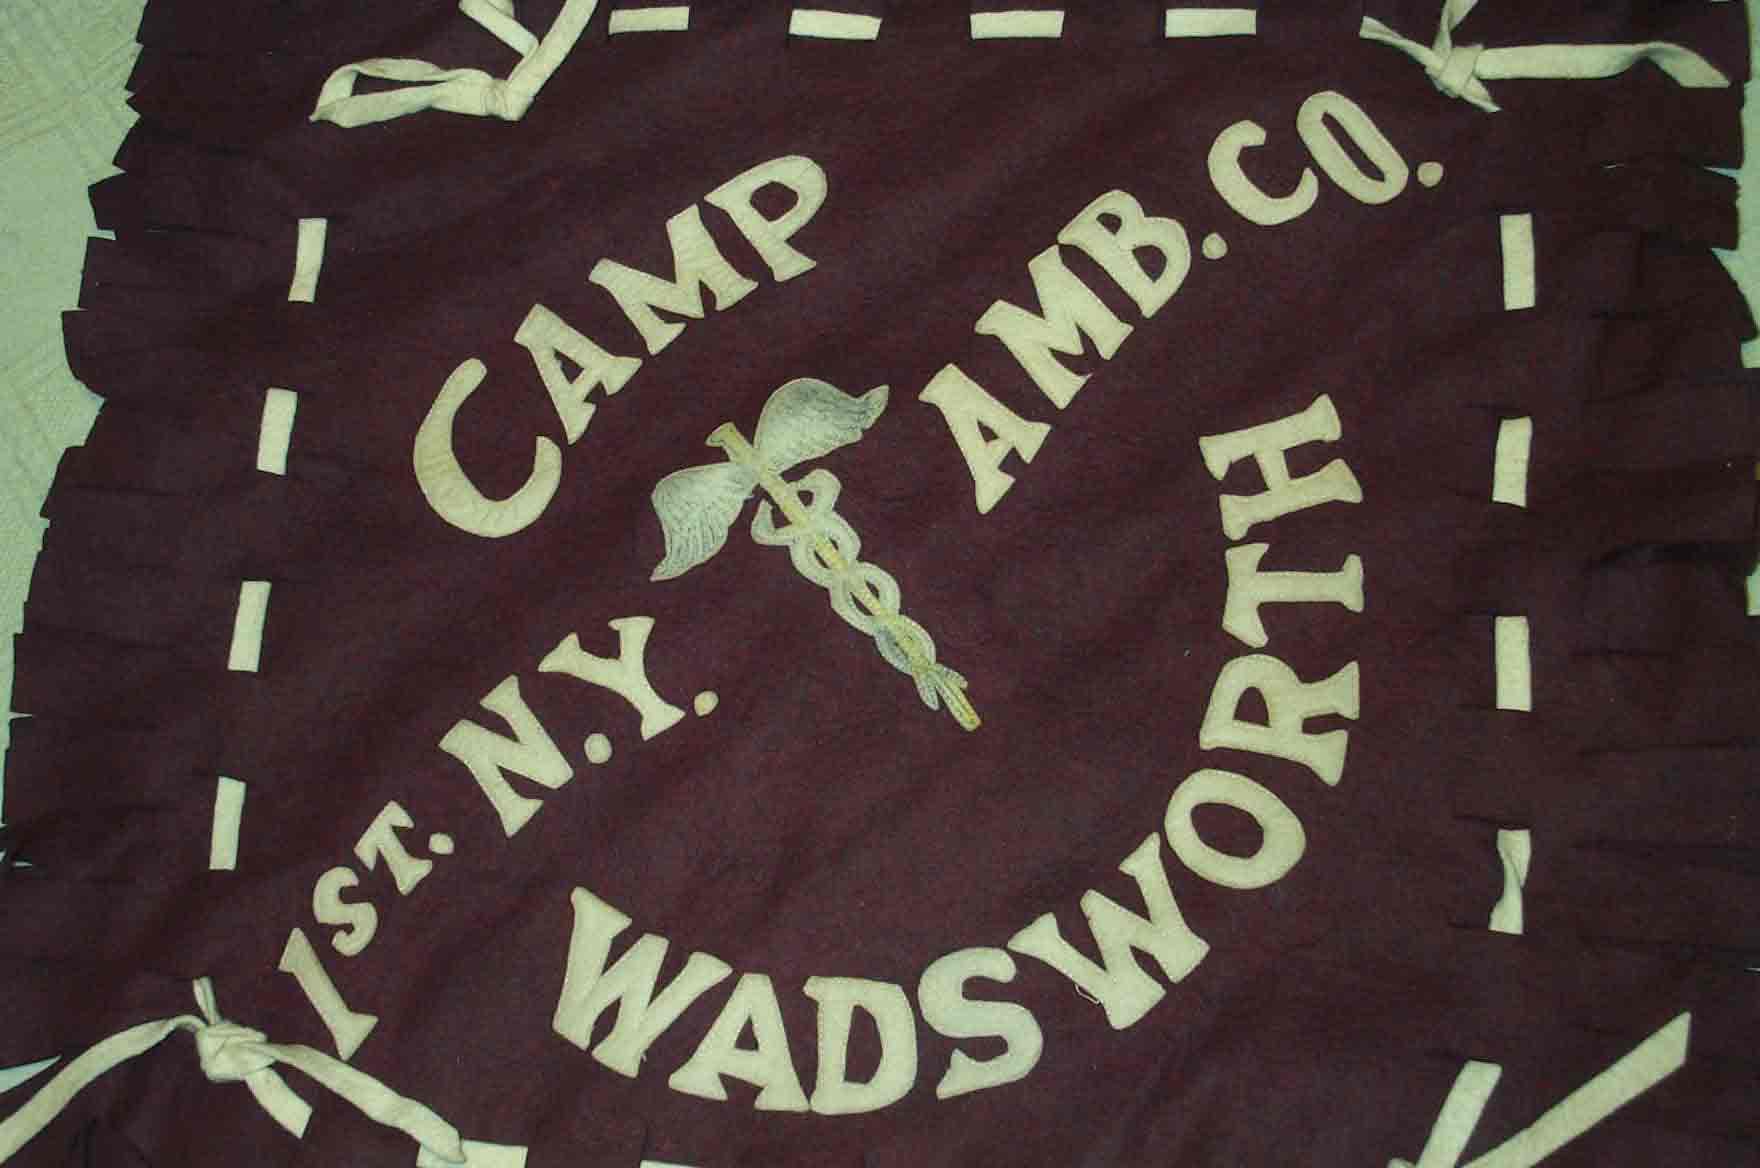 Wall hanging and/or pillow cover, Camp Wadsworth. MH Feldbin collection